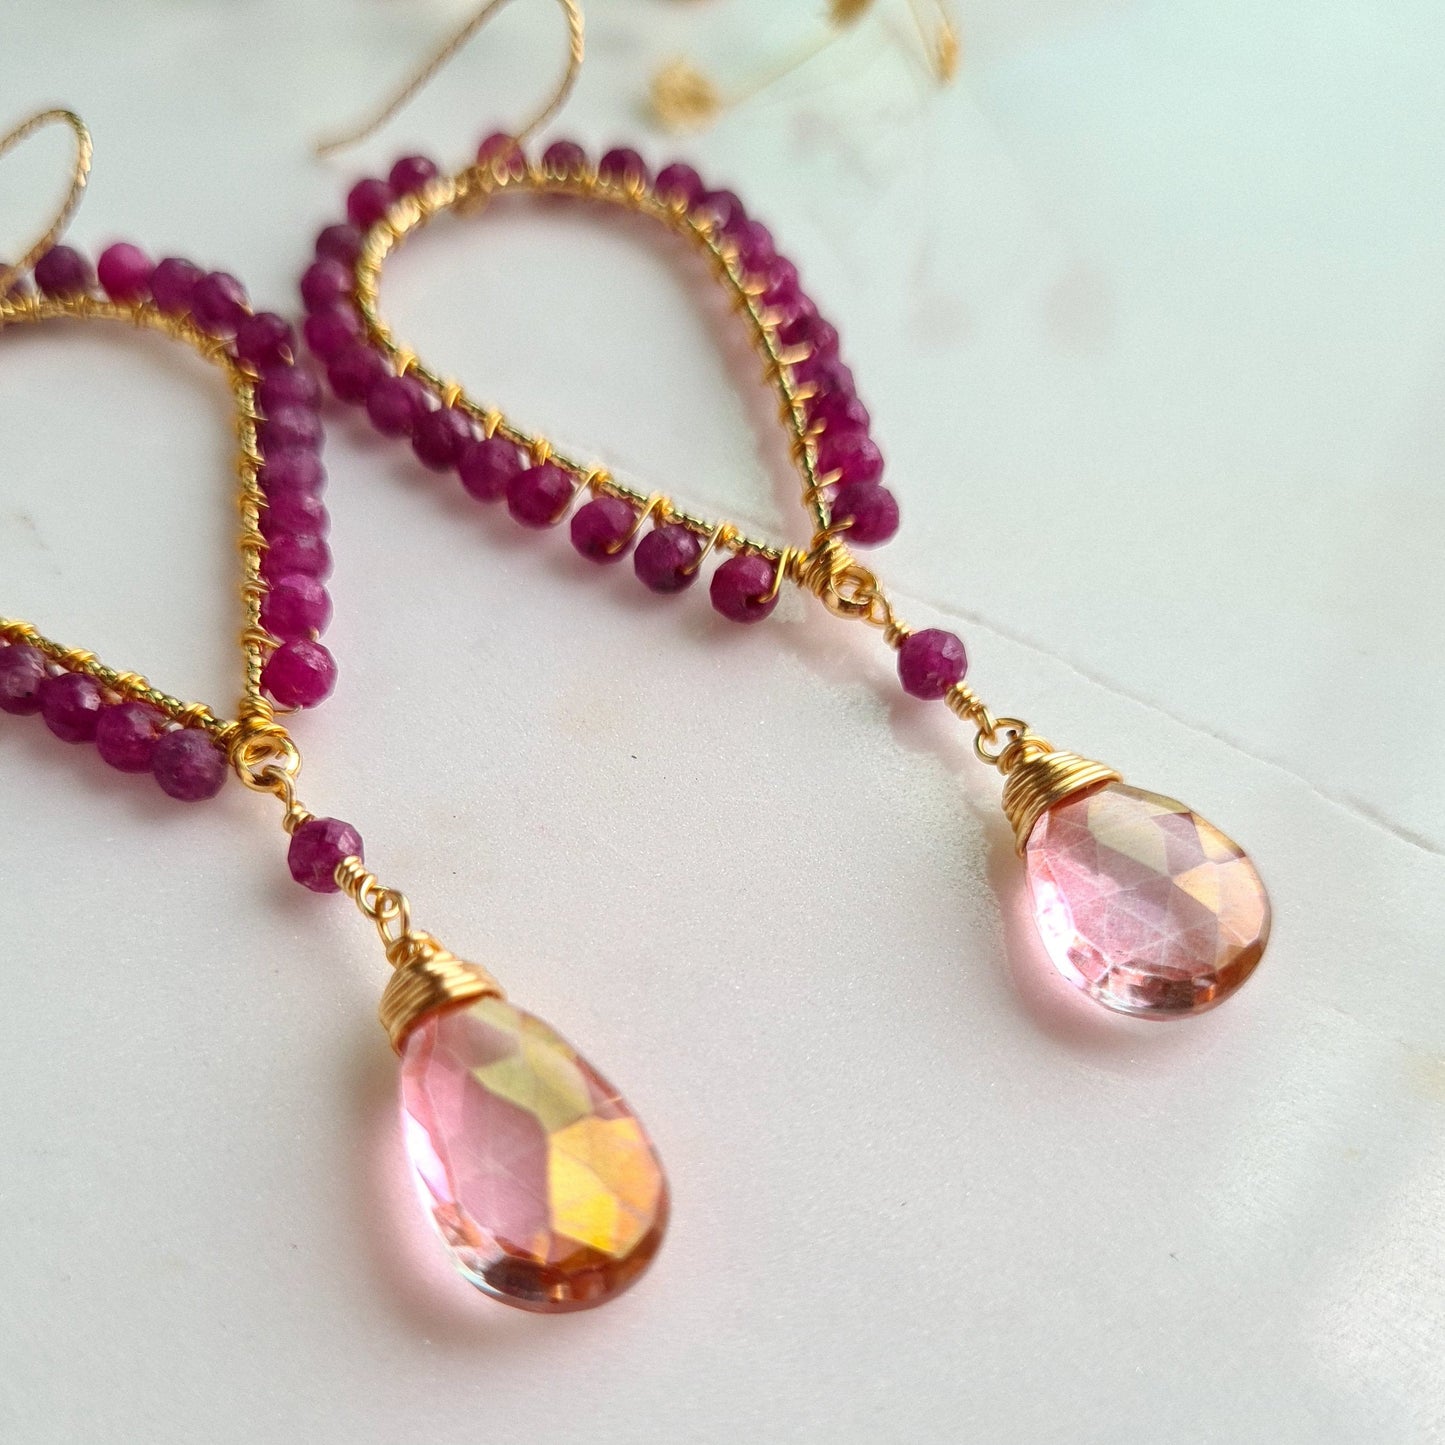 Inverted Tear Drop Gemstone Earrings - Pink Mystic Coated Quartz with Ruby